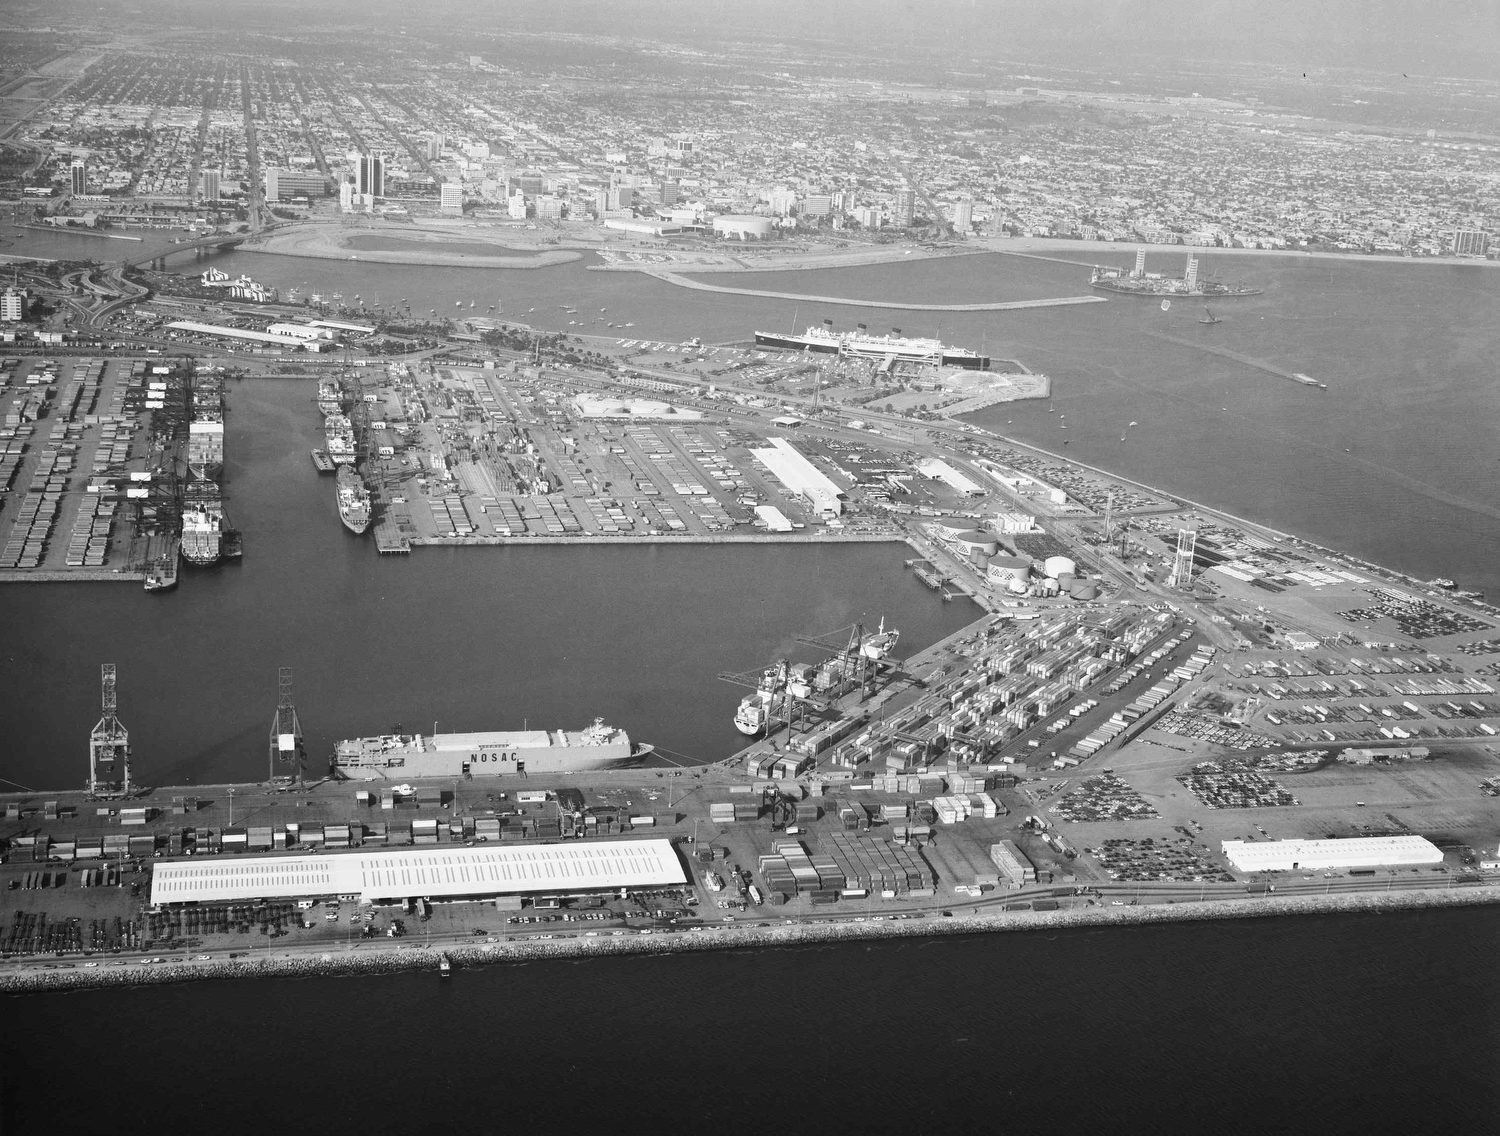 An aerial shot of Pier J and the downtown skyline, probably around 1979.